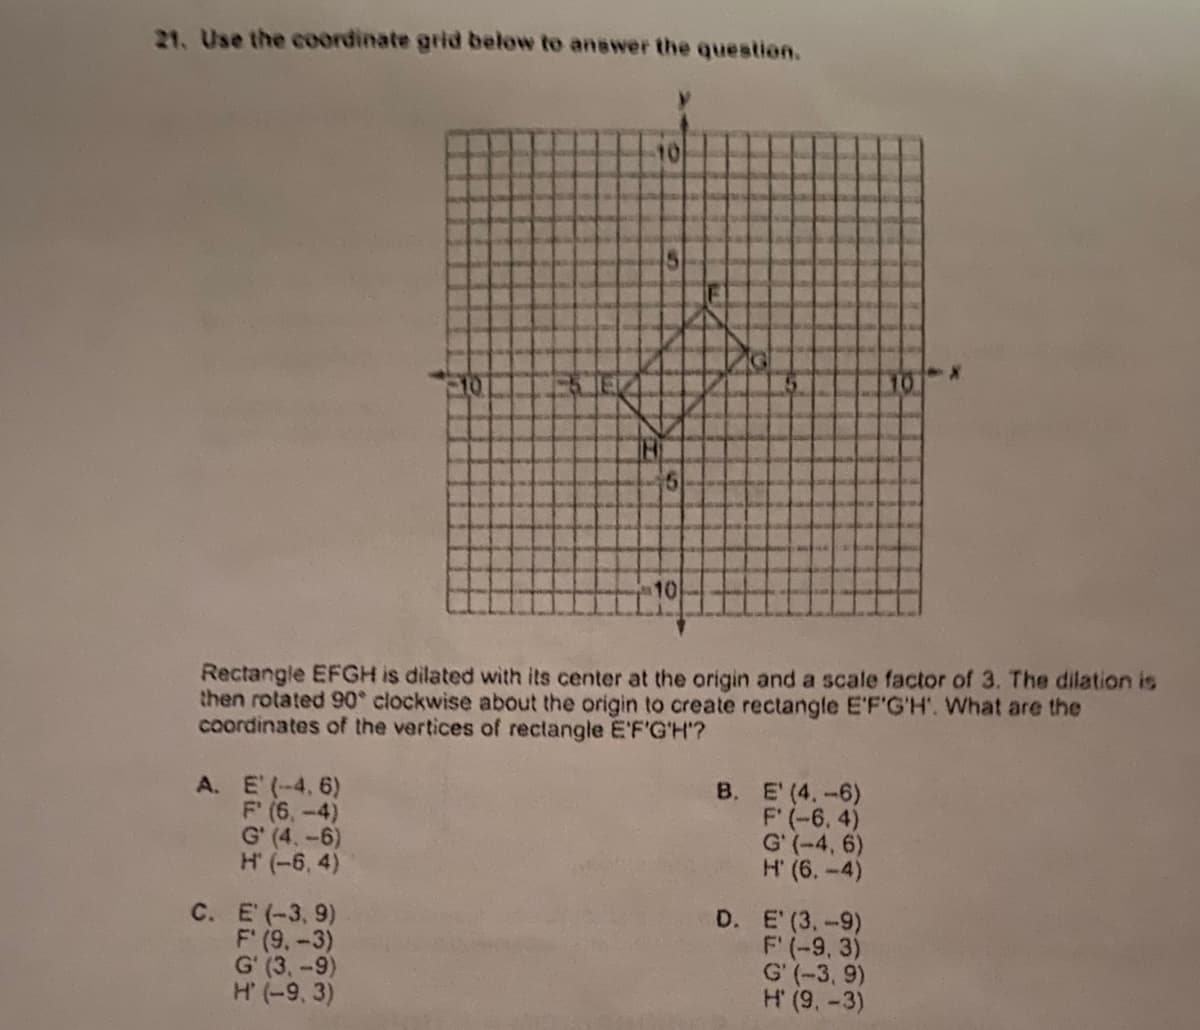 21. Use the coordinate grid below to answer the question.
210
10
Rectangle EFGH is dilated with its center at the origin and a scale factor of 3. The dilation is
then rotated 90° clockwise about the origin to create rectangle E'F'G'H'. What are the
coordinates of the vertices of rectangle E'F'G'H'?
A. E' (-4. 6)
F (6,-4)
G' (4,-6)
H (-6, 4)
B. E' (4.-6)
F' (-6. 4)
G' (-4, 6)
H' (6.-4)
C. E (-3, 9)
F' (9,-3)
G' (3,-9)
H' (-9, 3)
D. E (3,-9)
F' (-9, 3)
G' (-3, 9)
H (9, -3)
